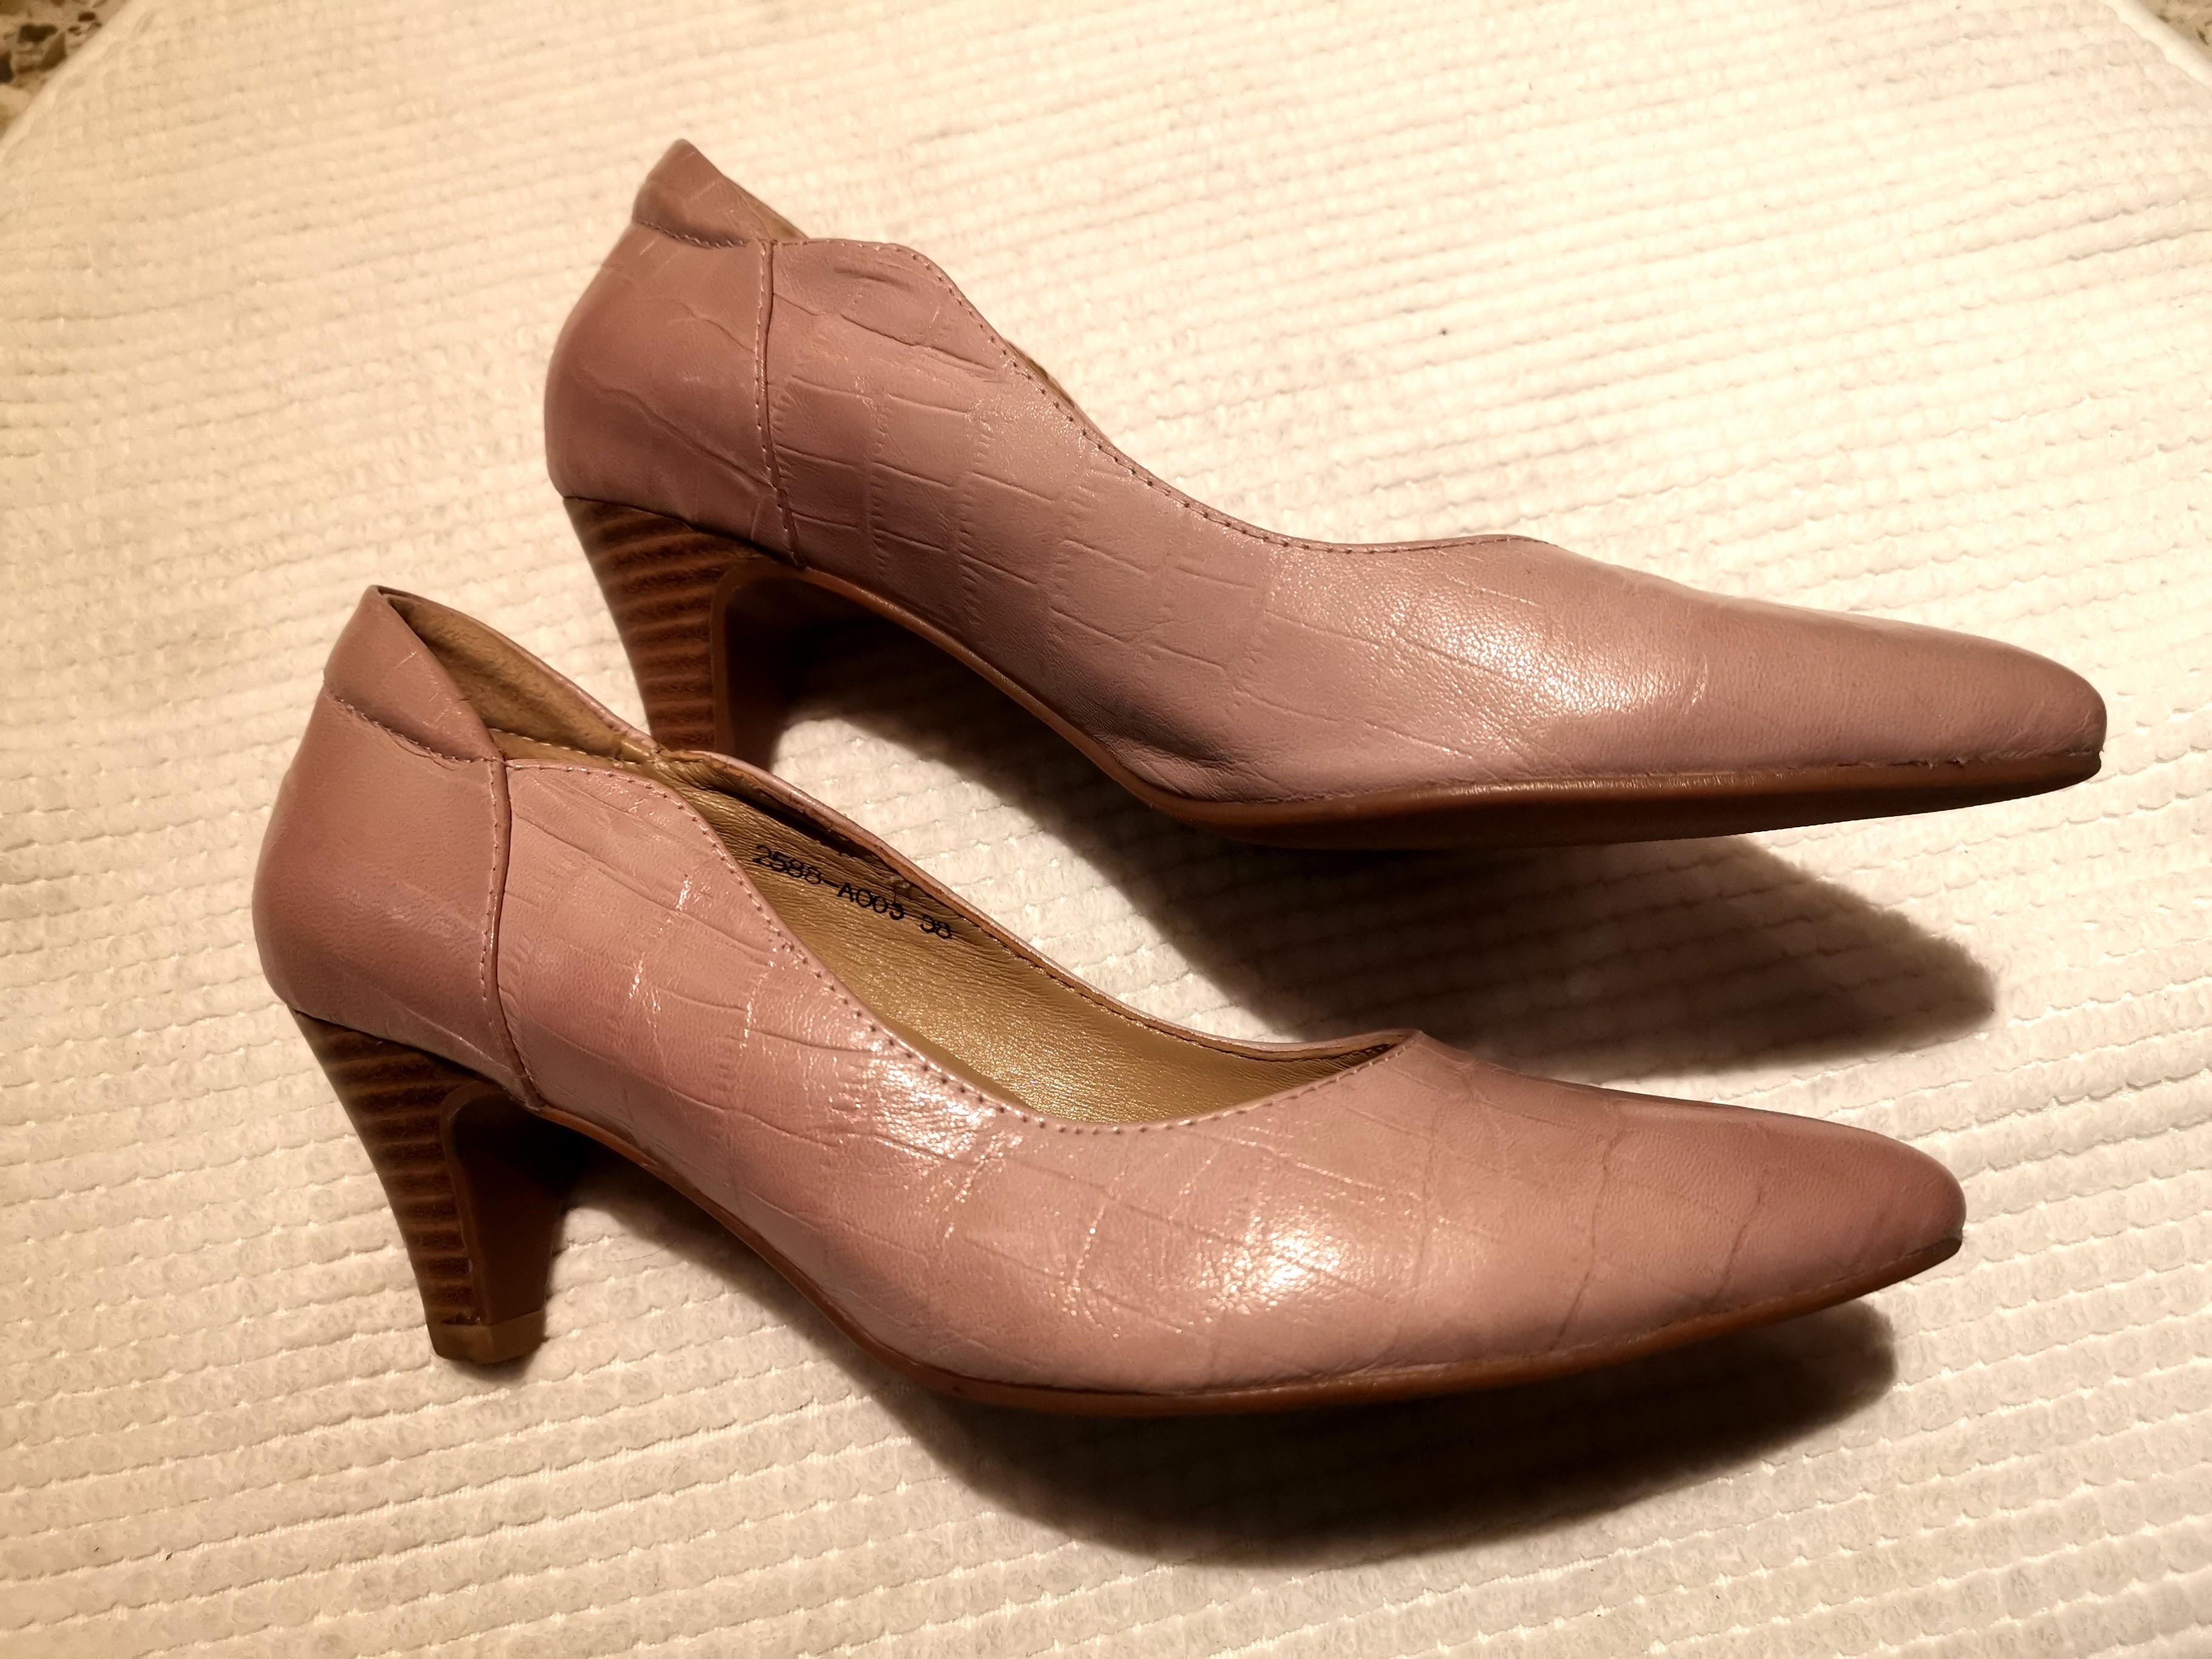 Real leather blush pink mid heel pumps 